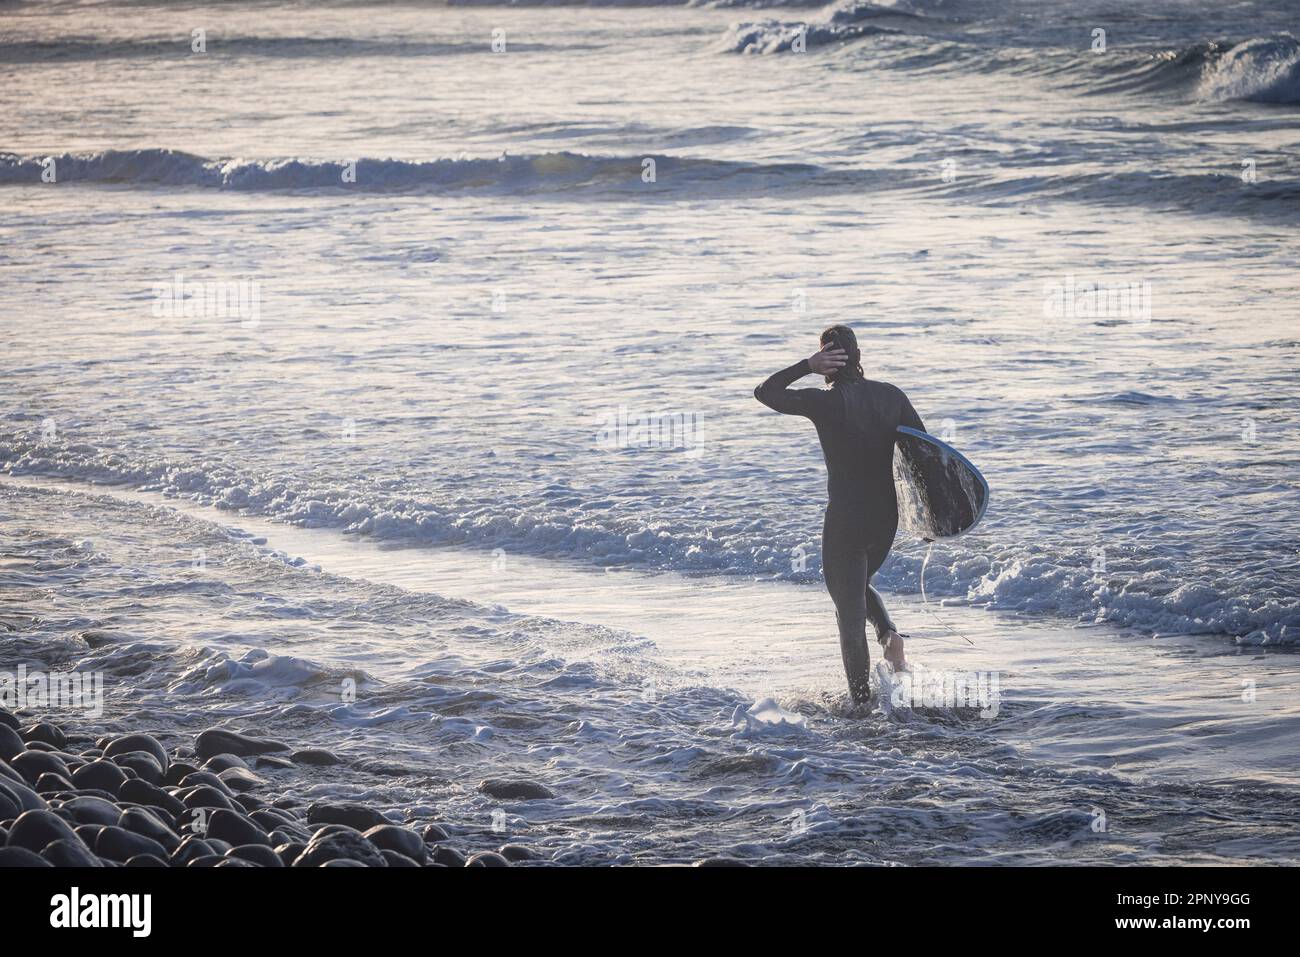 surfer coming out of the water at sunset Stock Photo